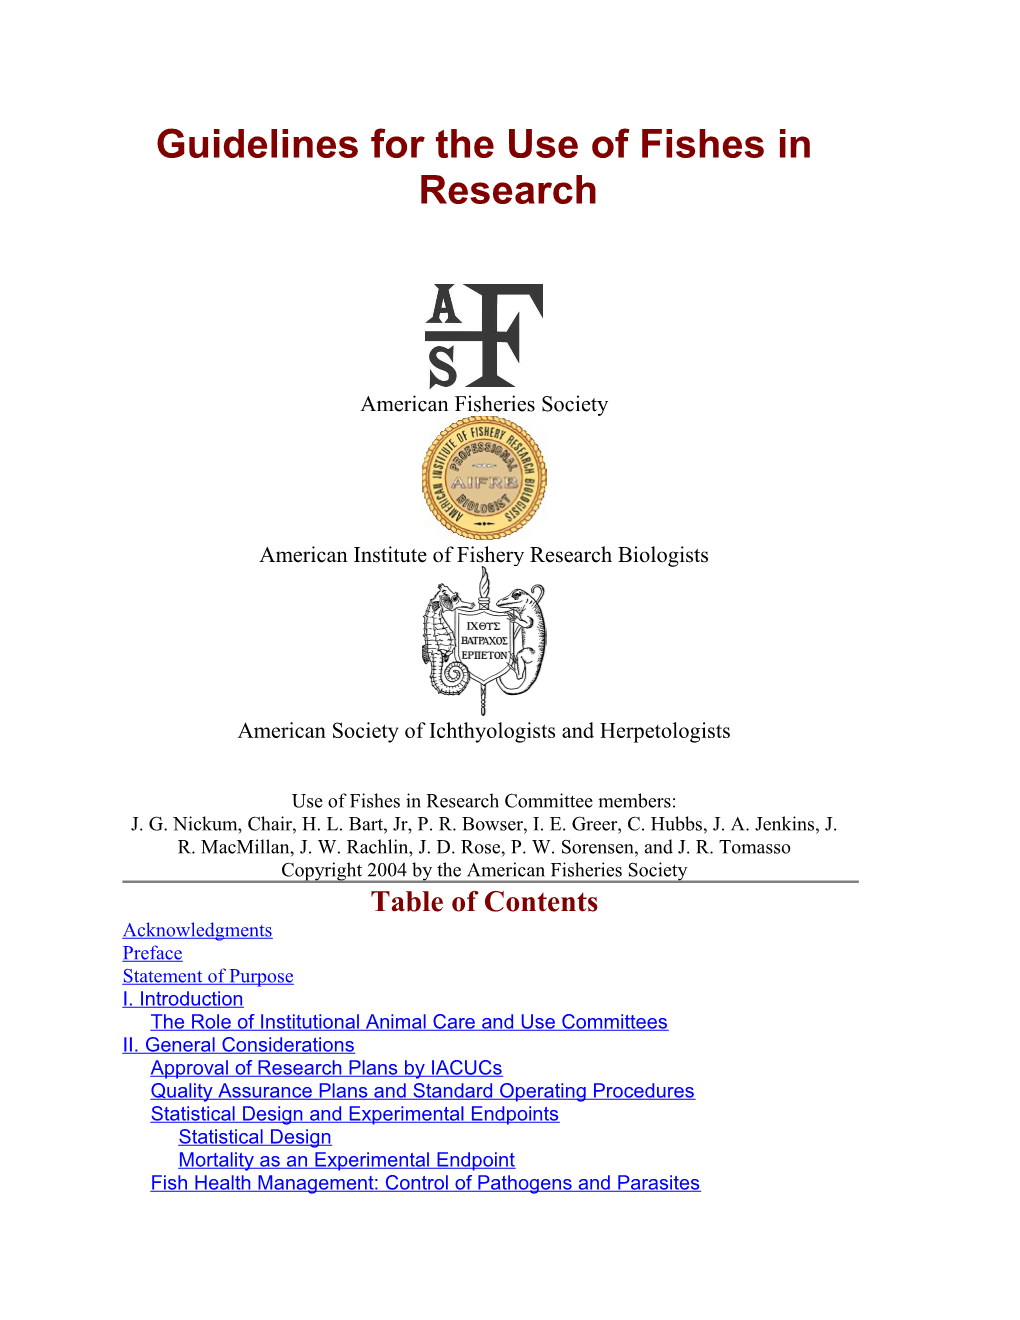 Guidelines for the Use of Fishes in Research